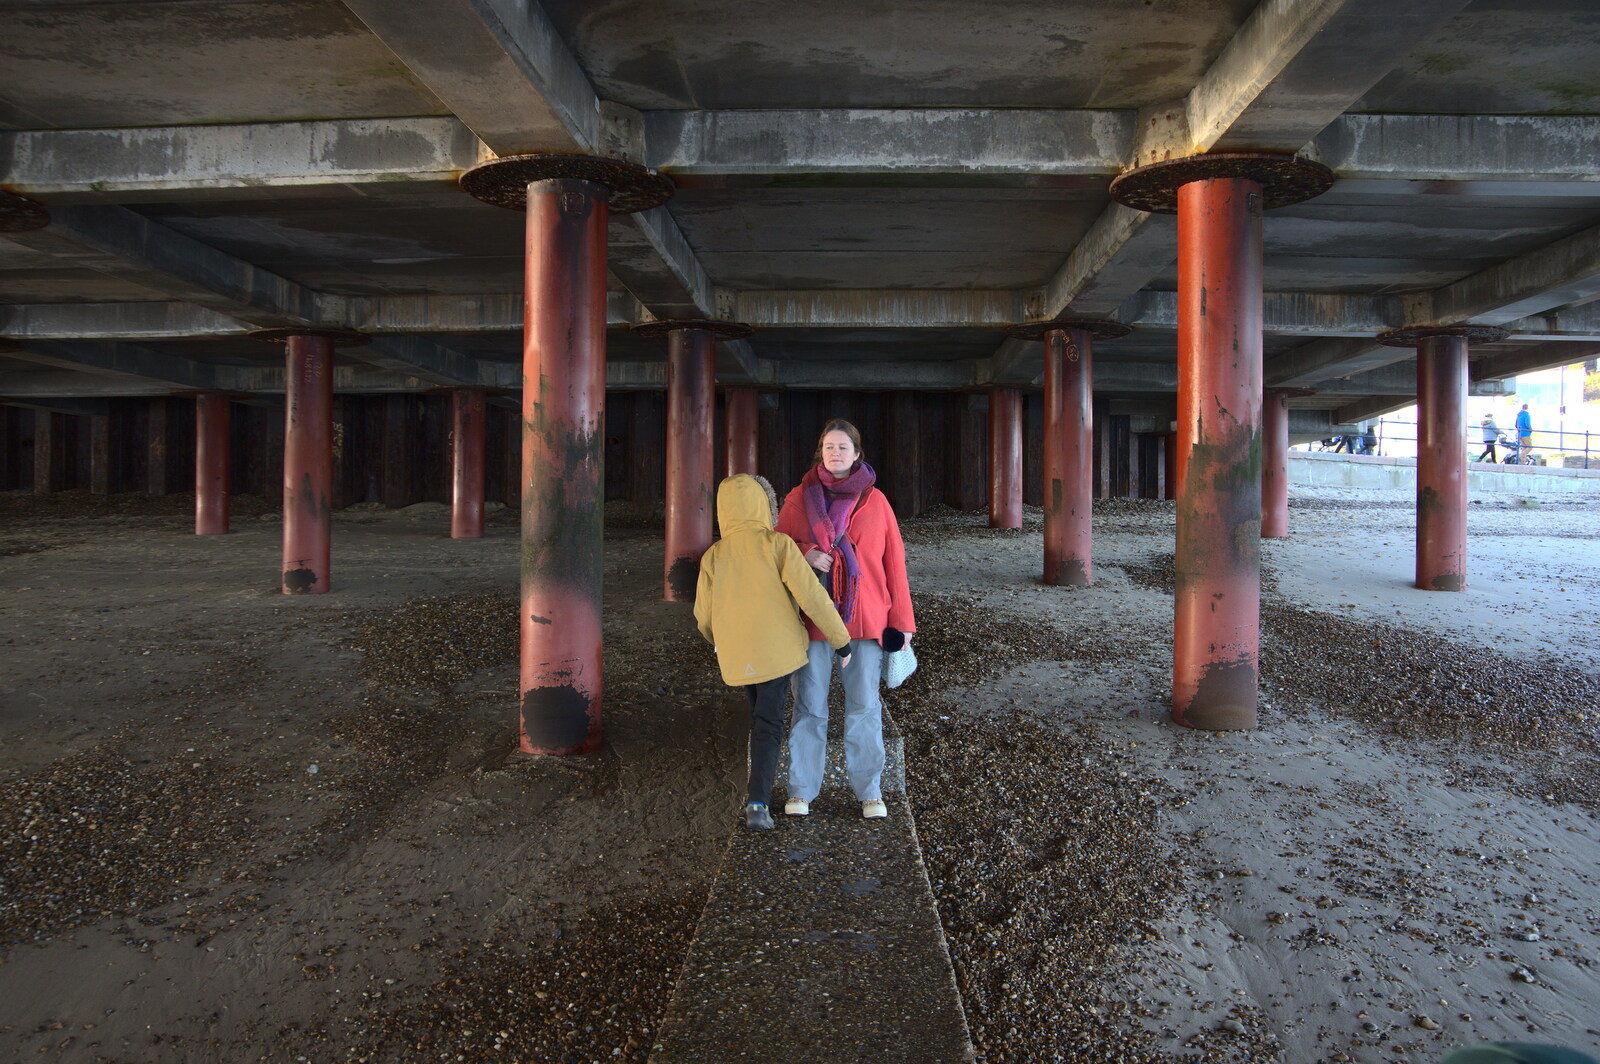 A Short Trip to Felixstowe, Suffolk - 22nd January 2023: Harry and Isobel under the pier